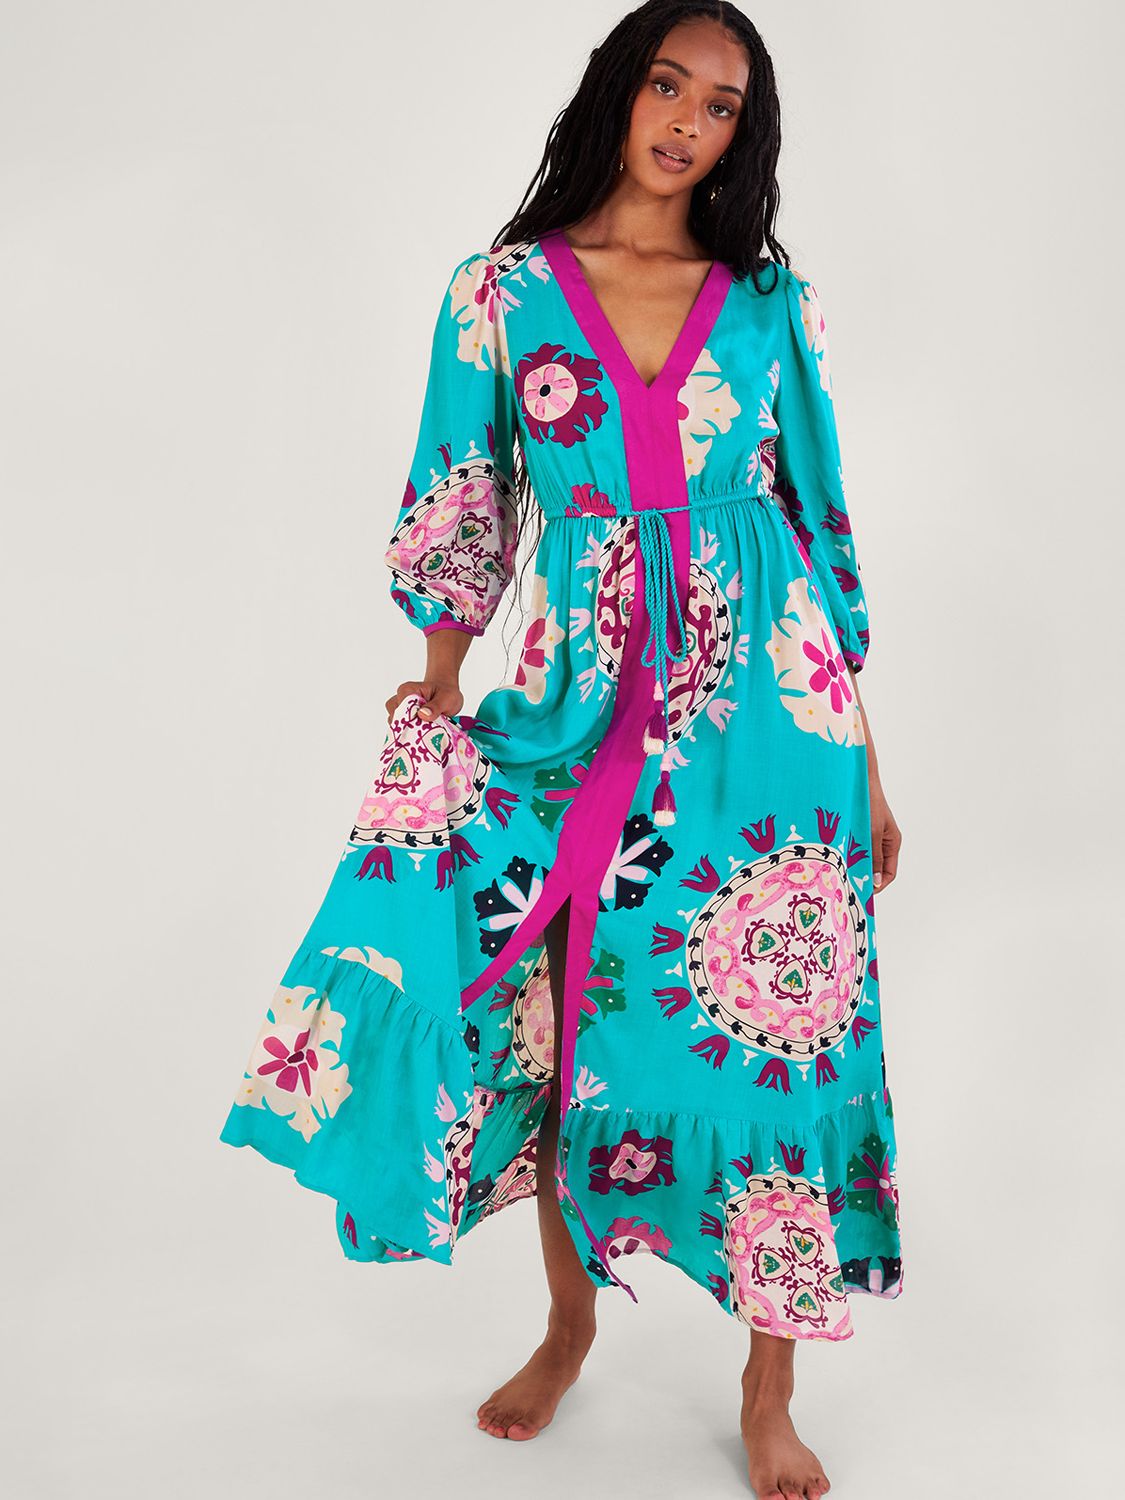 Floral Print Tunic Dress in LENZING™ ECOVERO™ Green